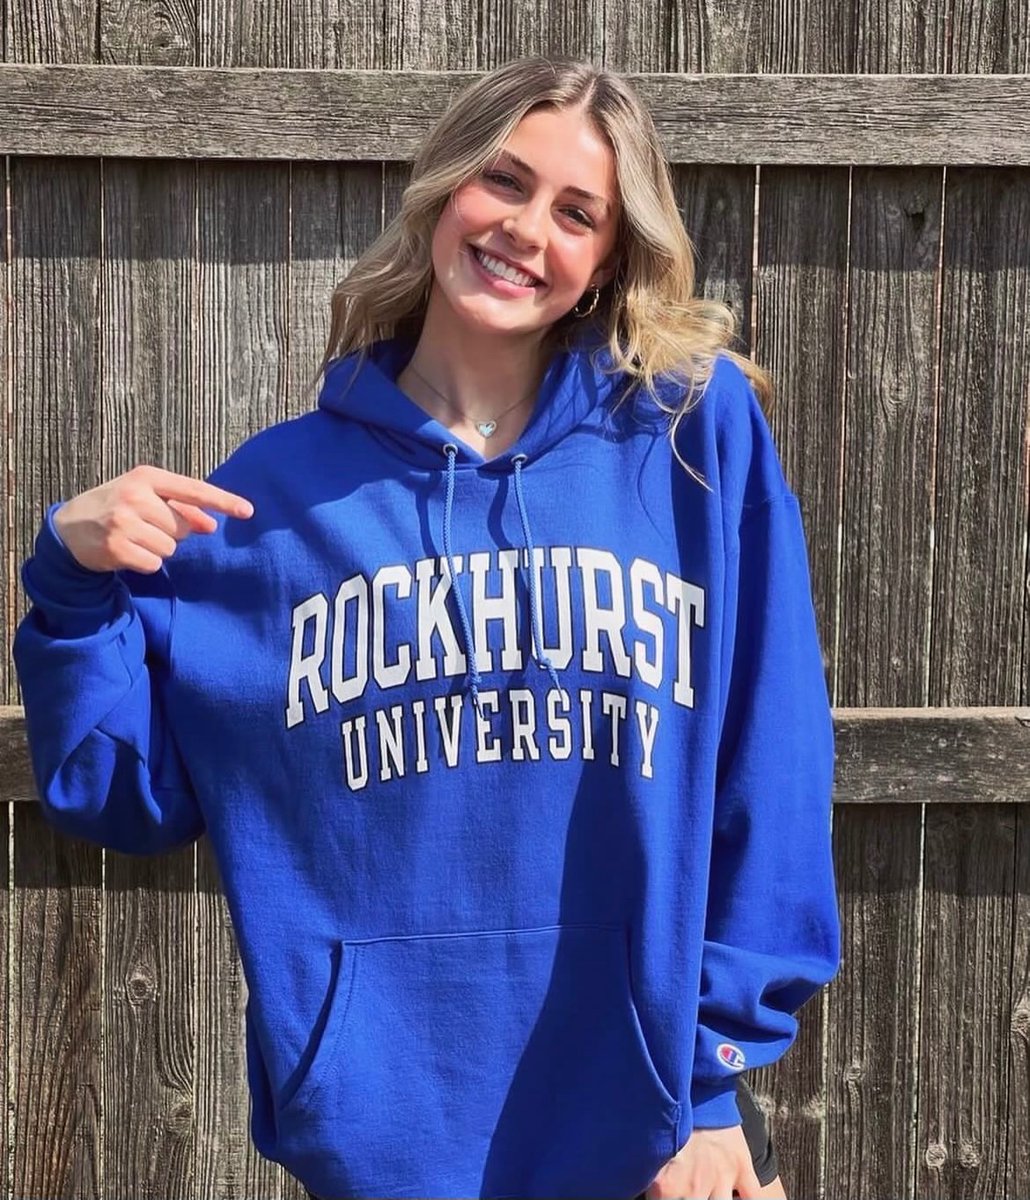 Yay! I’m super excited to announce that I will be continuing my academic and volleyball career at Rockhurst University!!! I couldn’t be more excited!! Big thanks to my coaches, parents, teammates, and friends!! GO HAWKS!! 💙 @RUhawks @CoachMikeDZ @mcintosh_mat @PrepDigOK